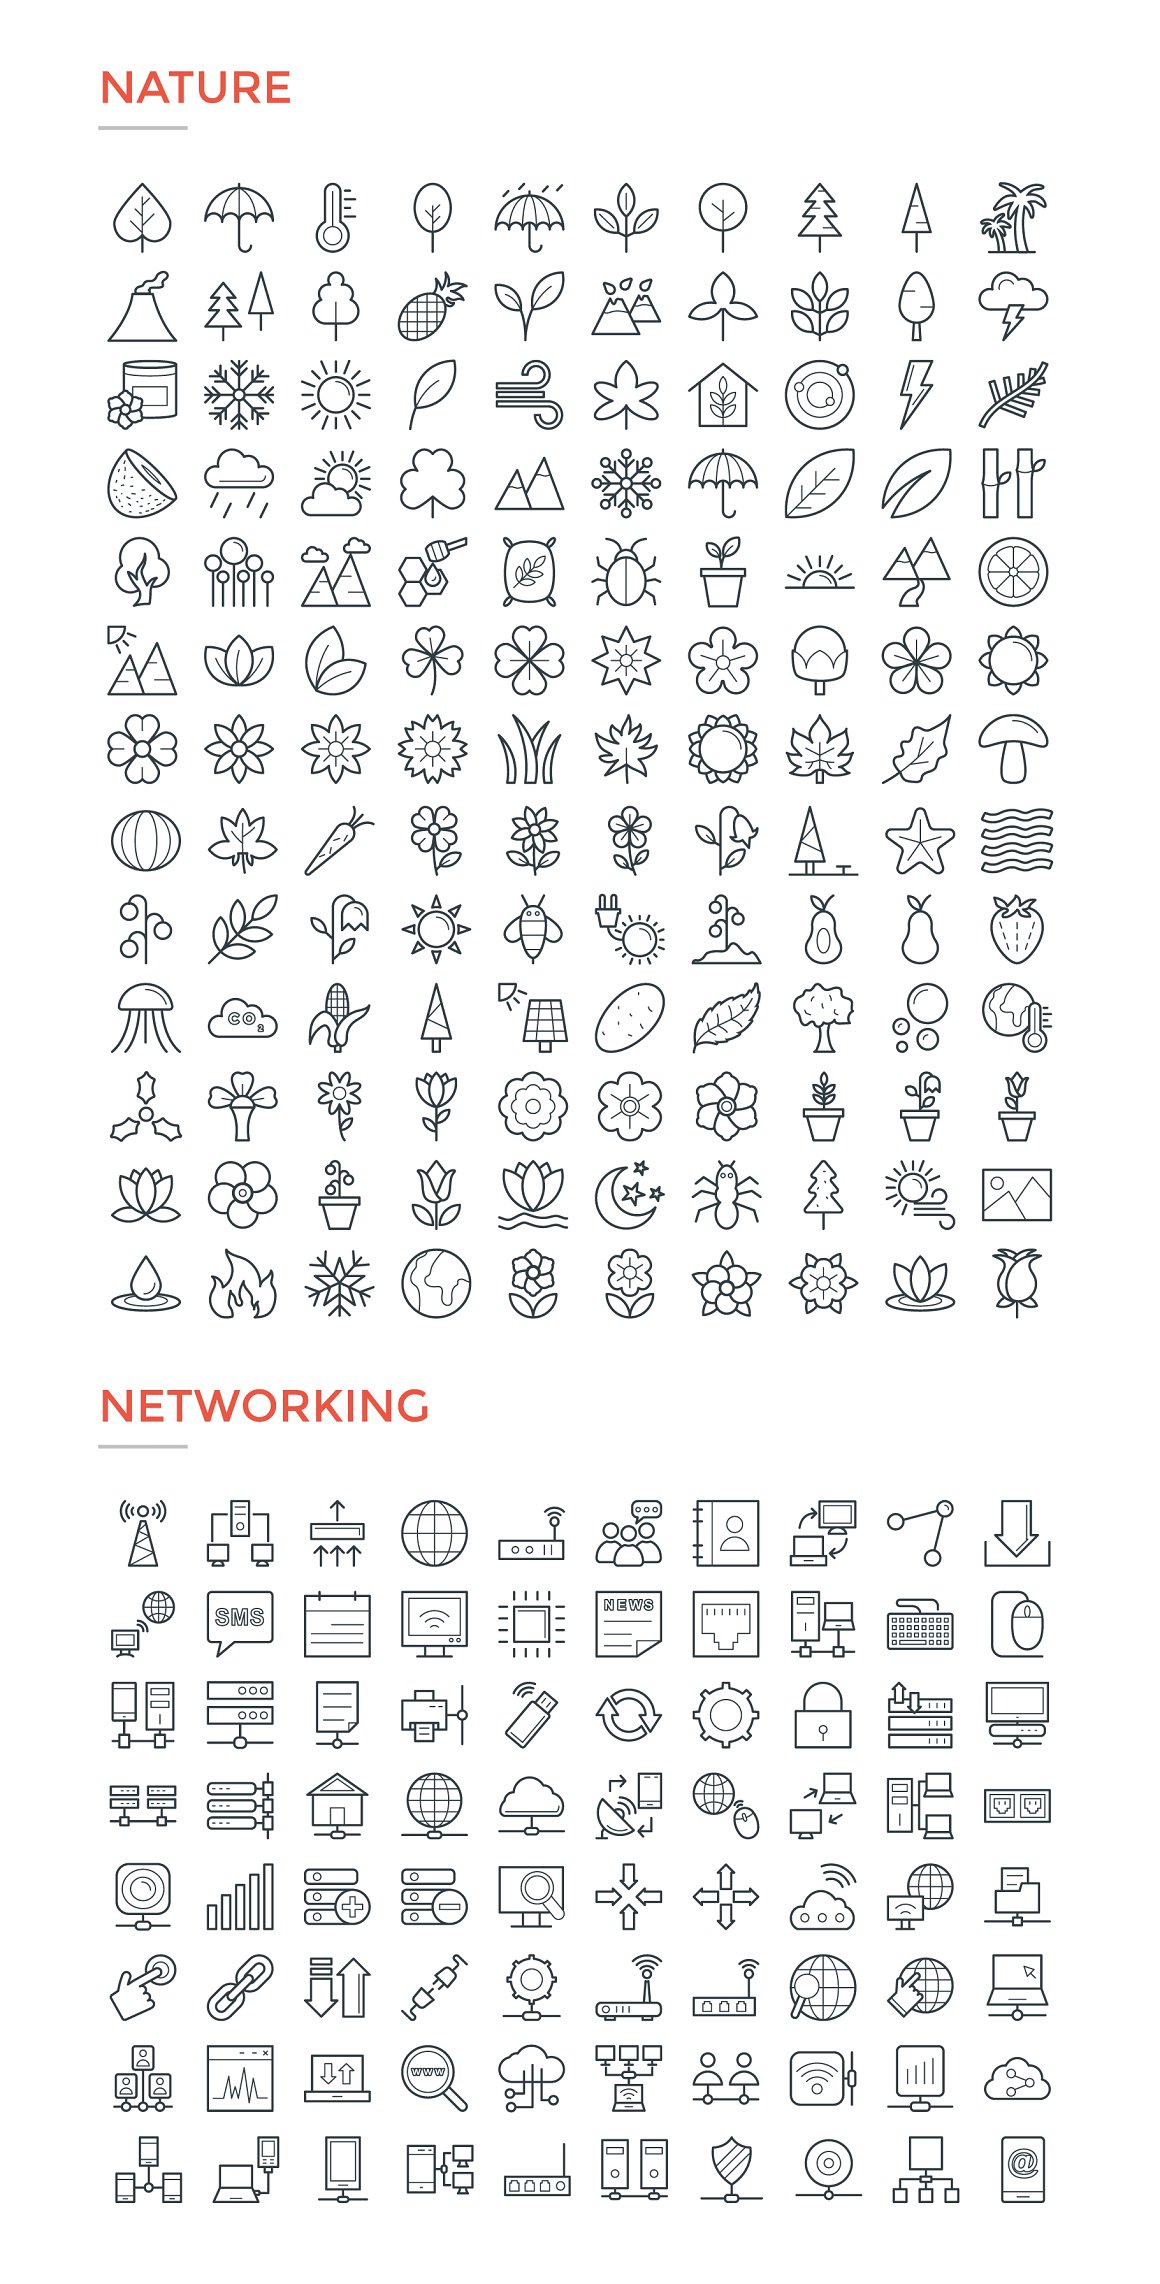 Black different nature and networking icons on a white background.